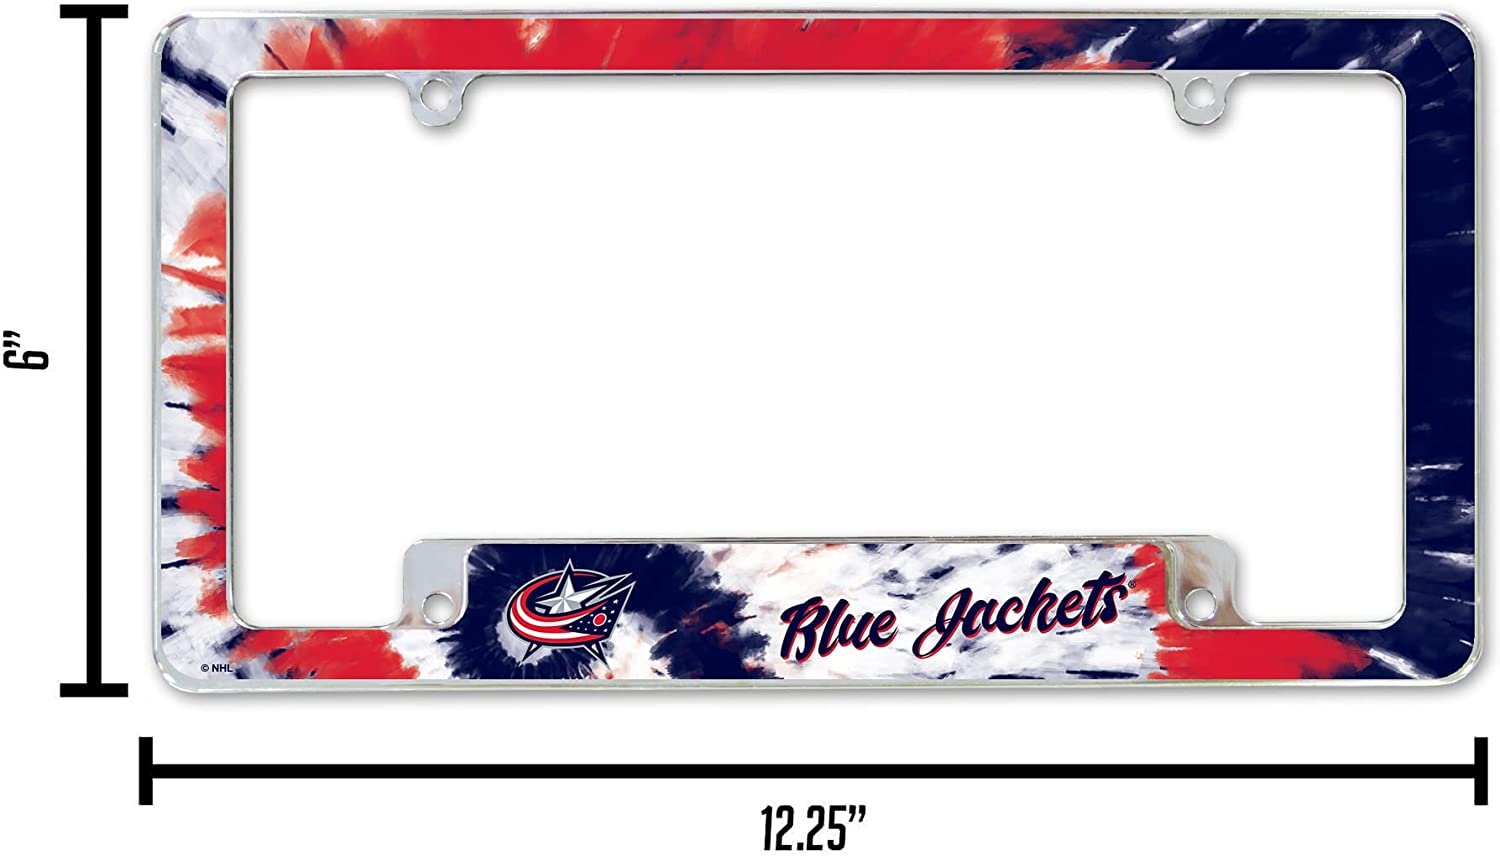 Columbus Blue Jackets Metal License Plate Frame Chrome Tag Cover Tie Dye Design 6x12 Inch